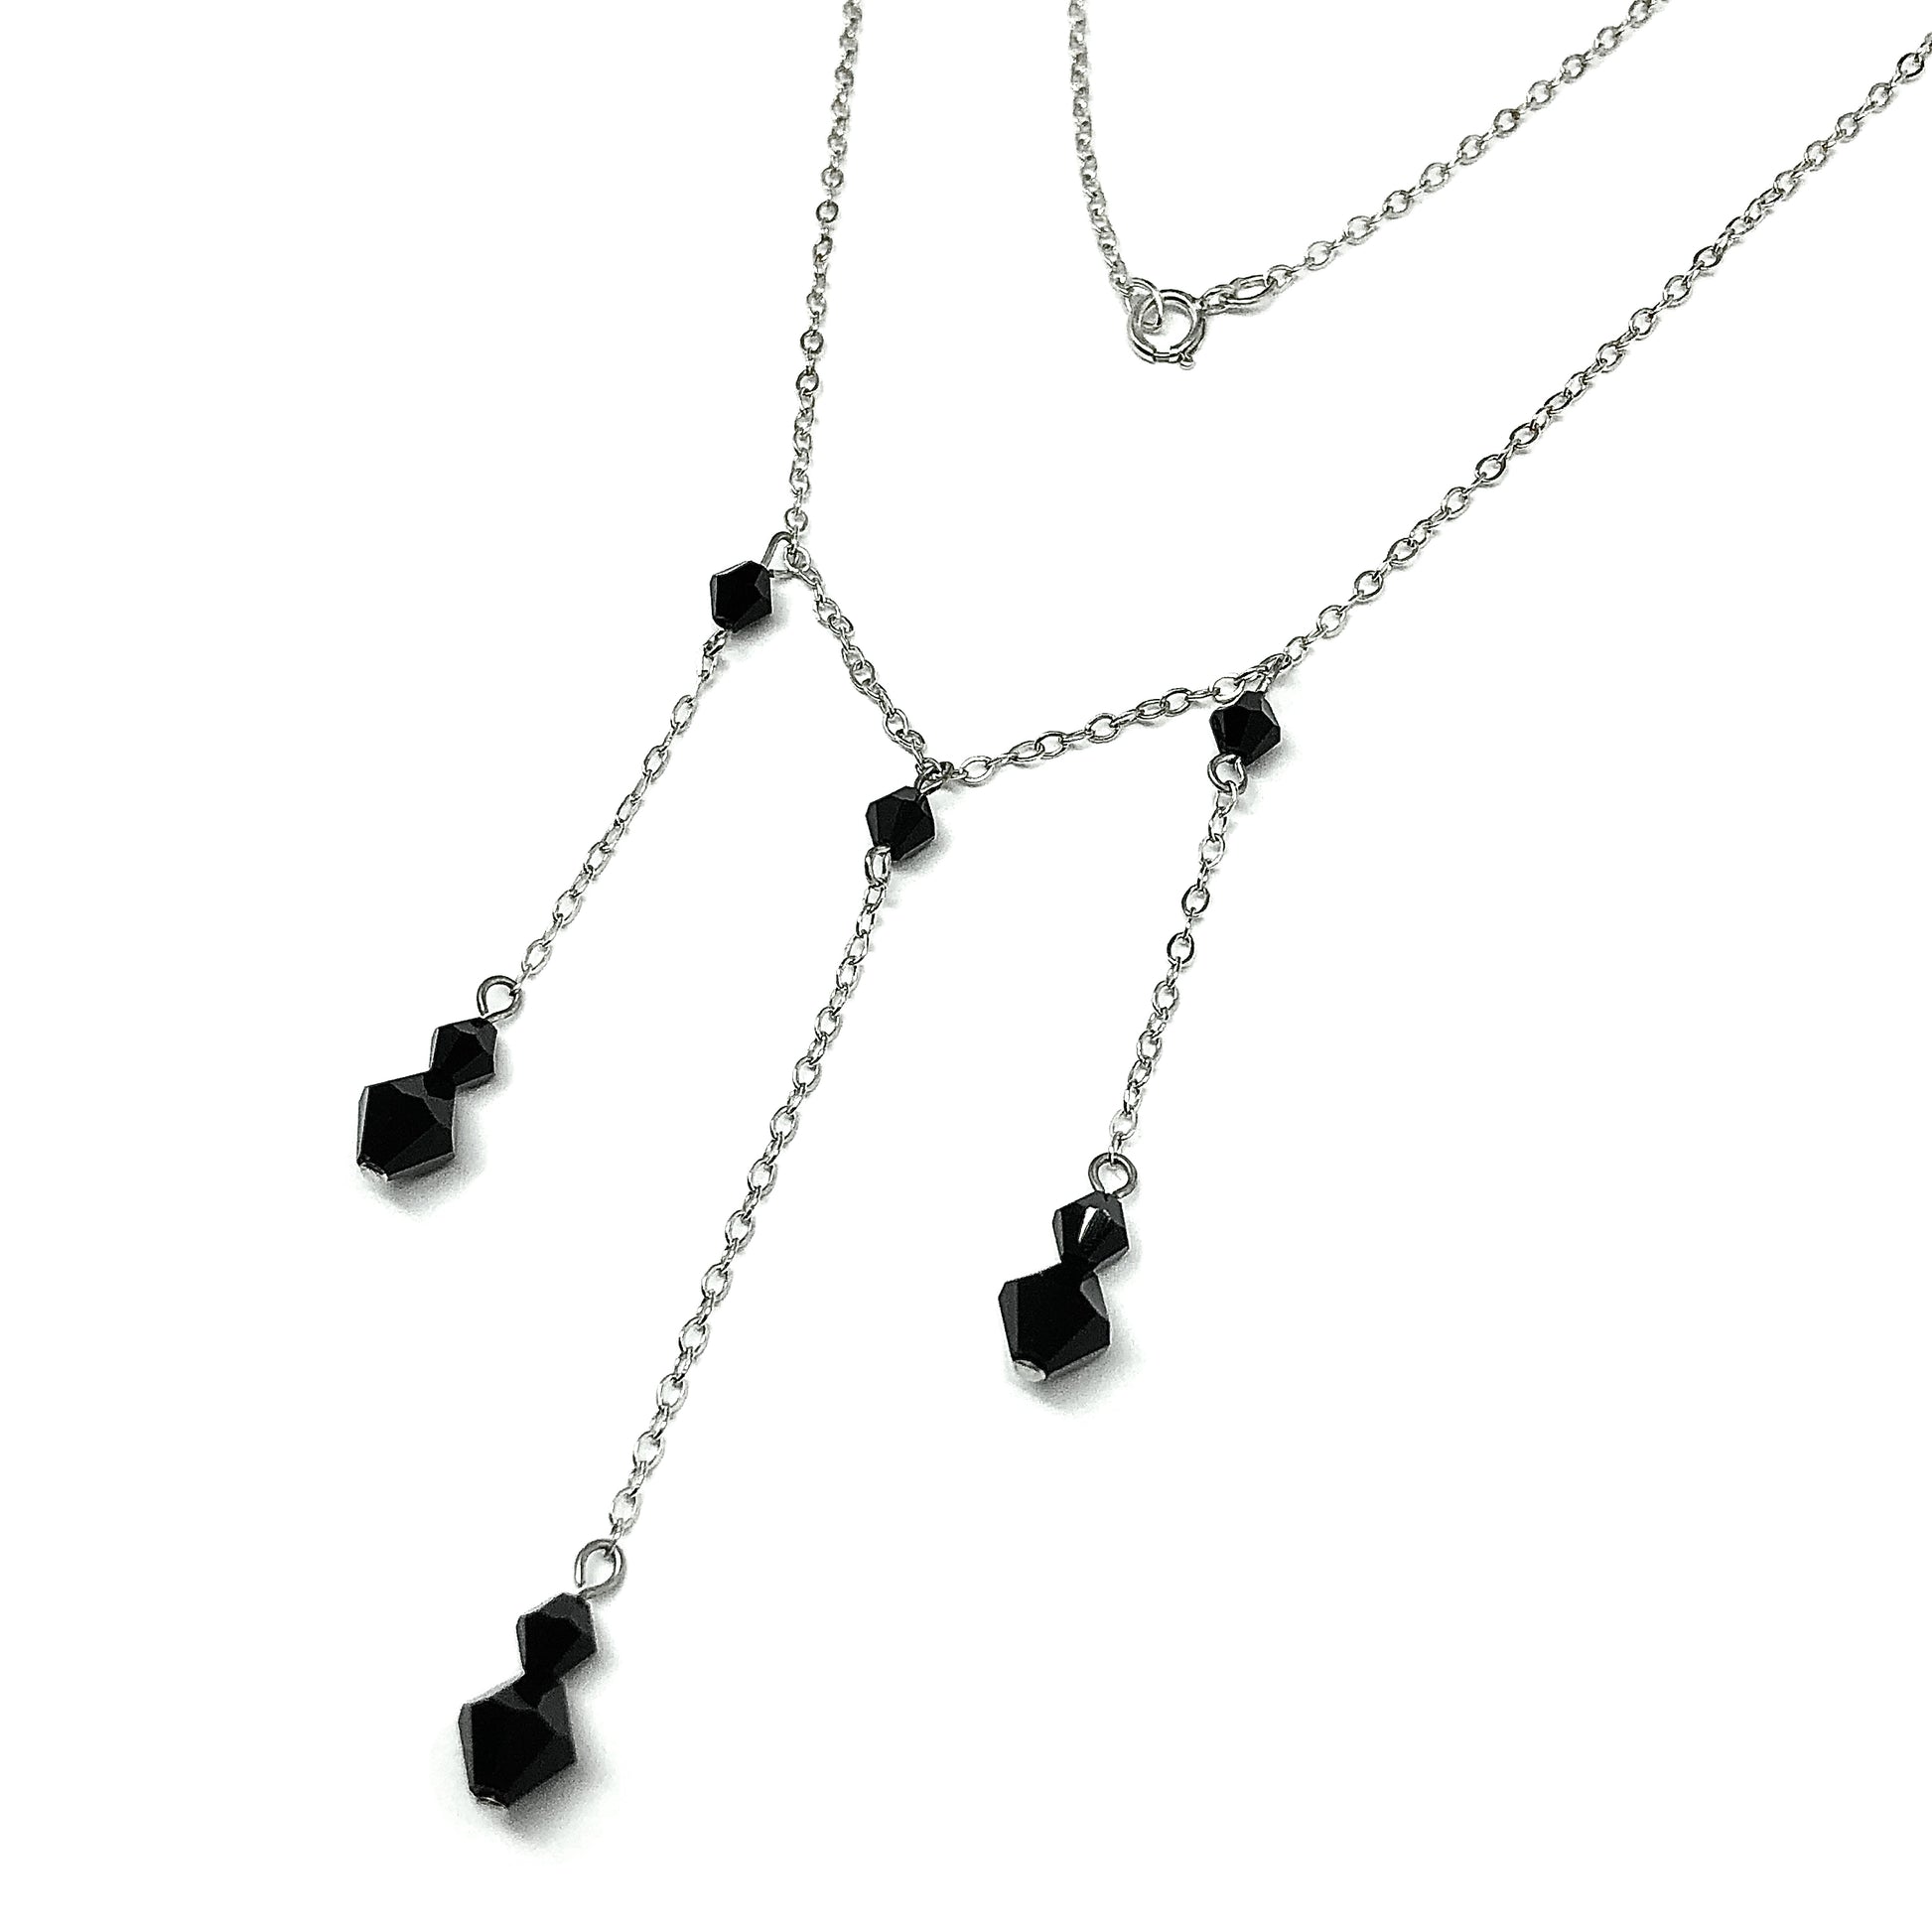 Stylish 16in Sterling Silver Black Bead Station Y Chain Necklace | Womens Chains, Necklaces, Beaded Necklace